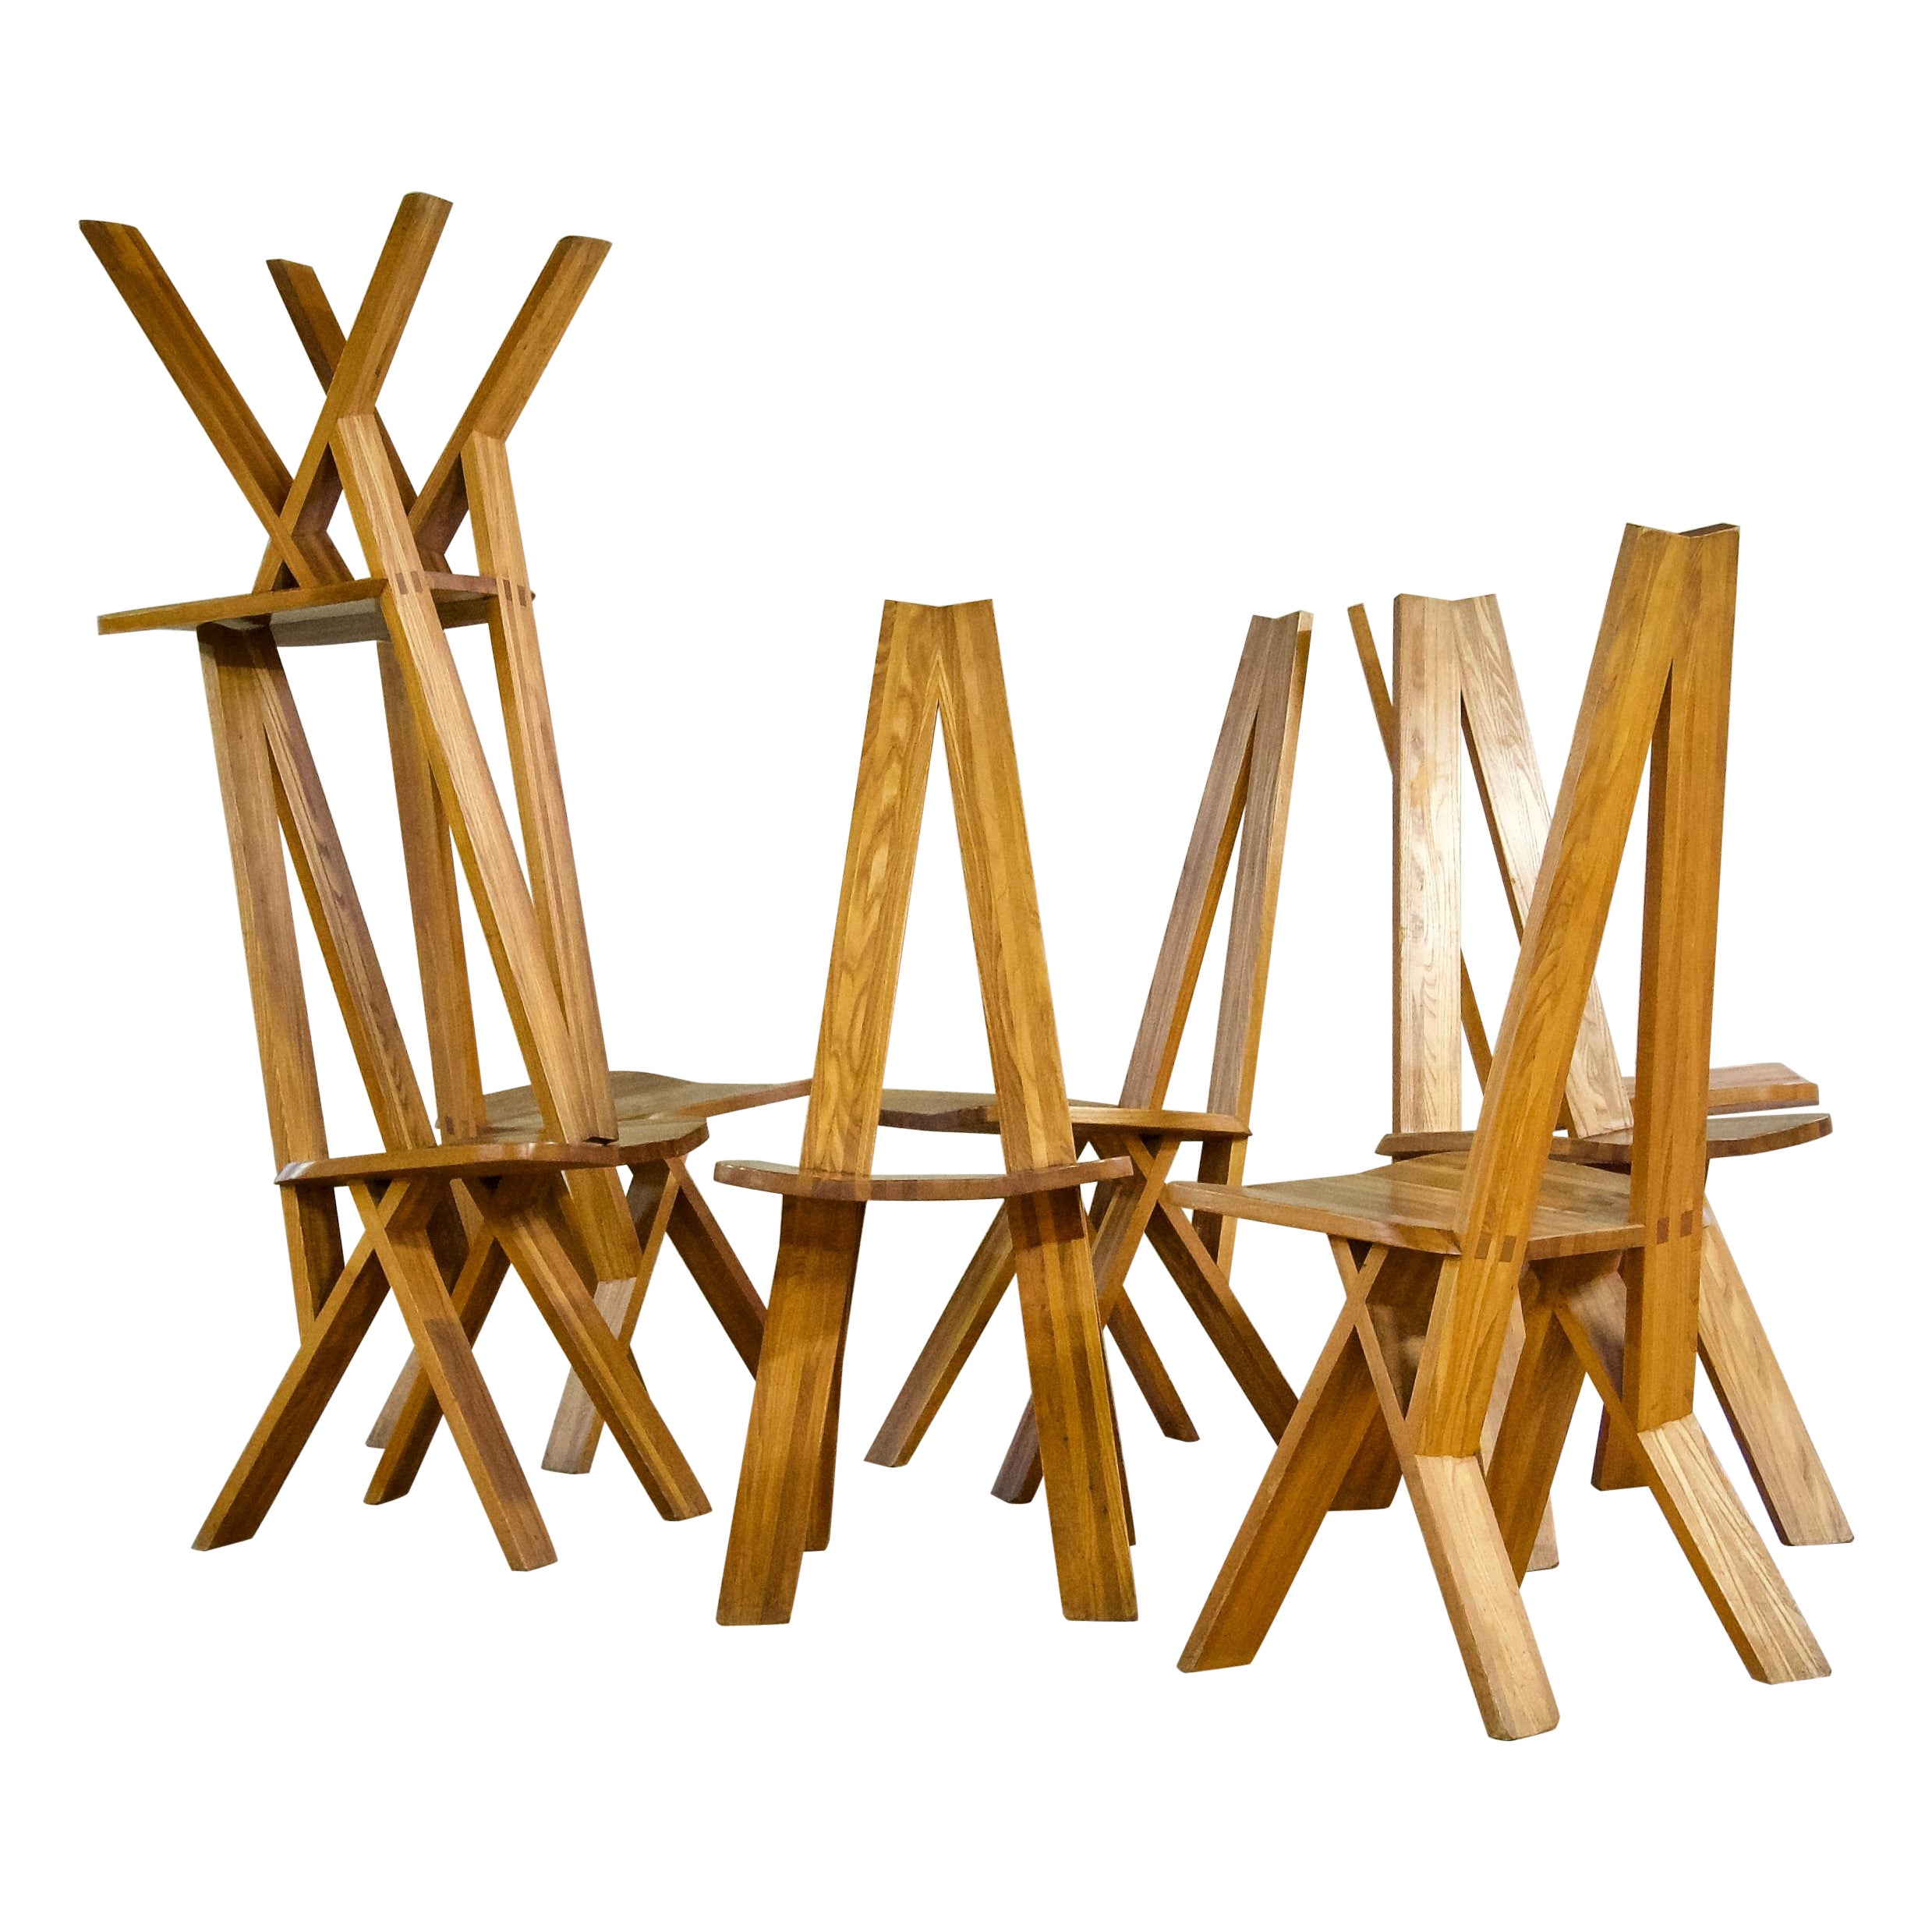 8x Elm "Chlacc" chairs, S45, Pierre Chapo, France, 1979